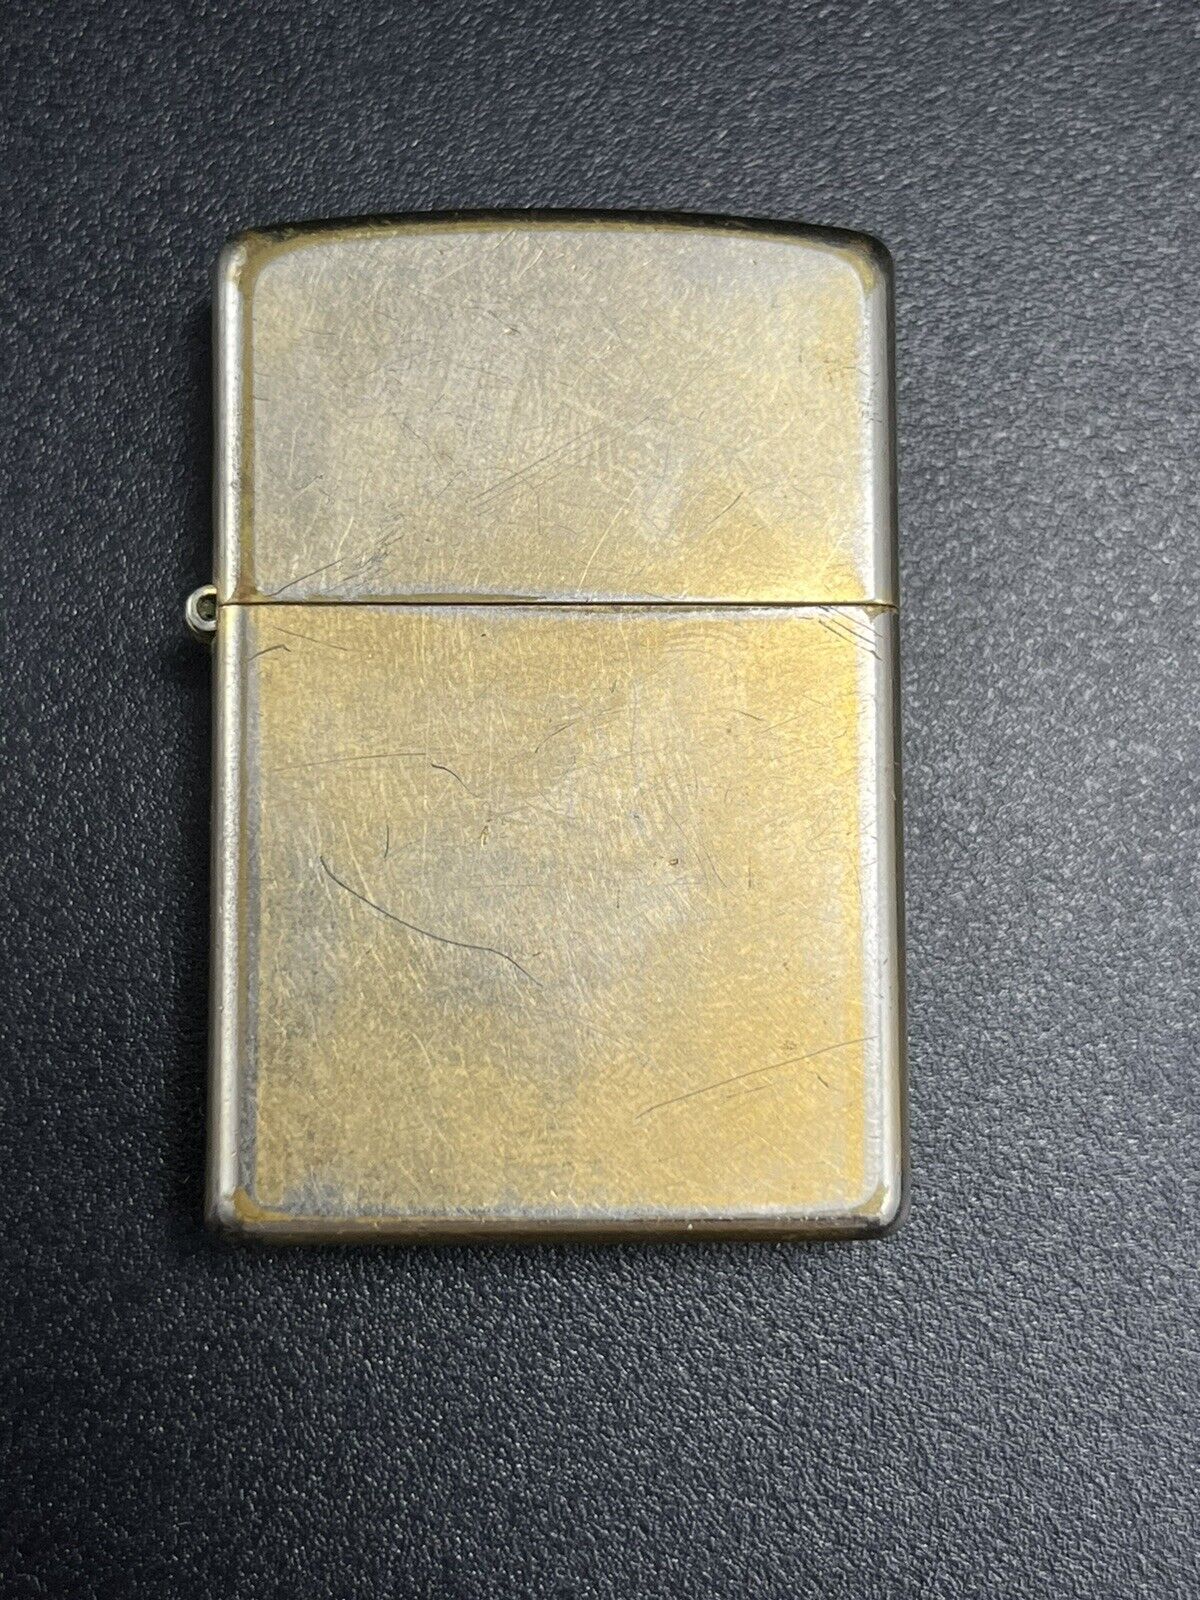 2004 Zippo Lighter Brass Color Toned Works Great 